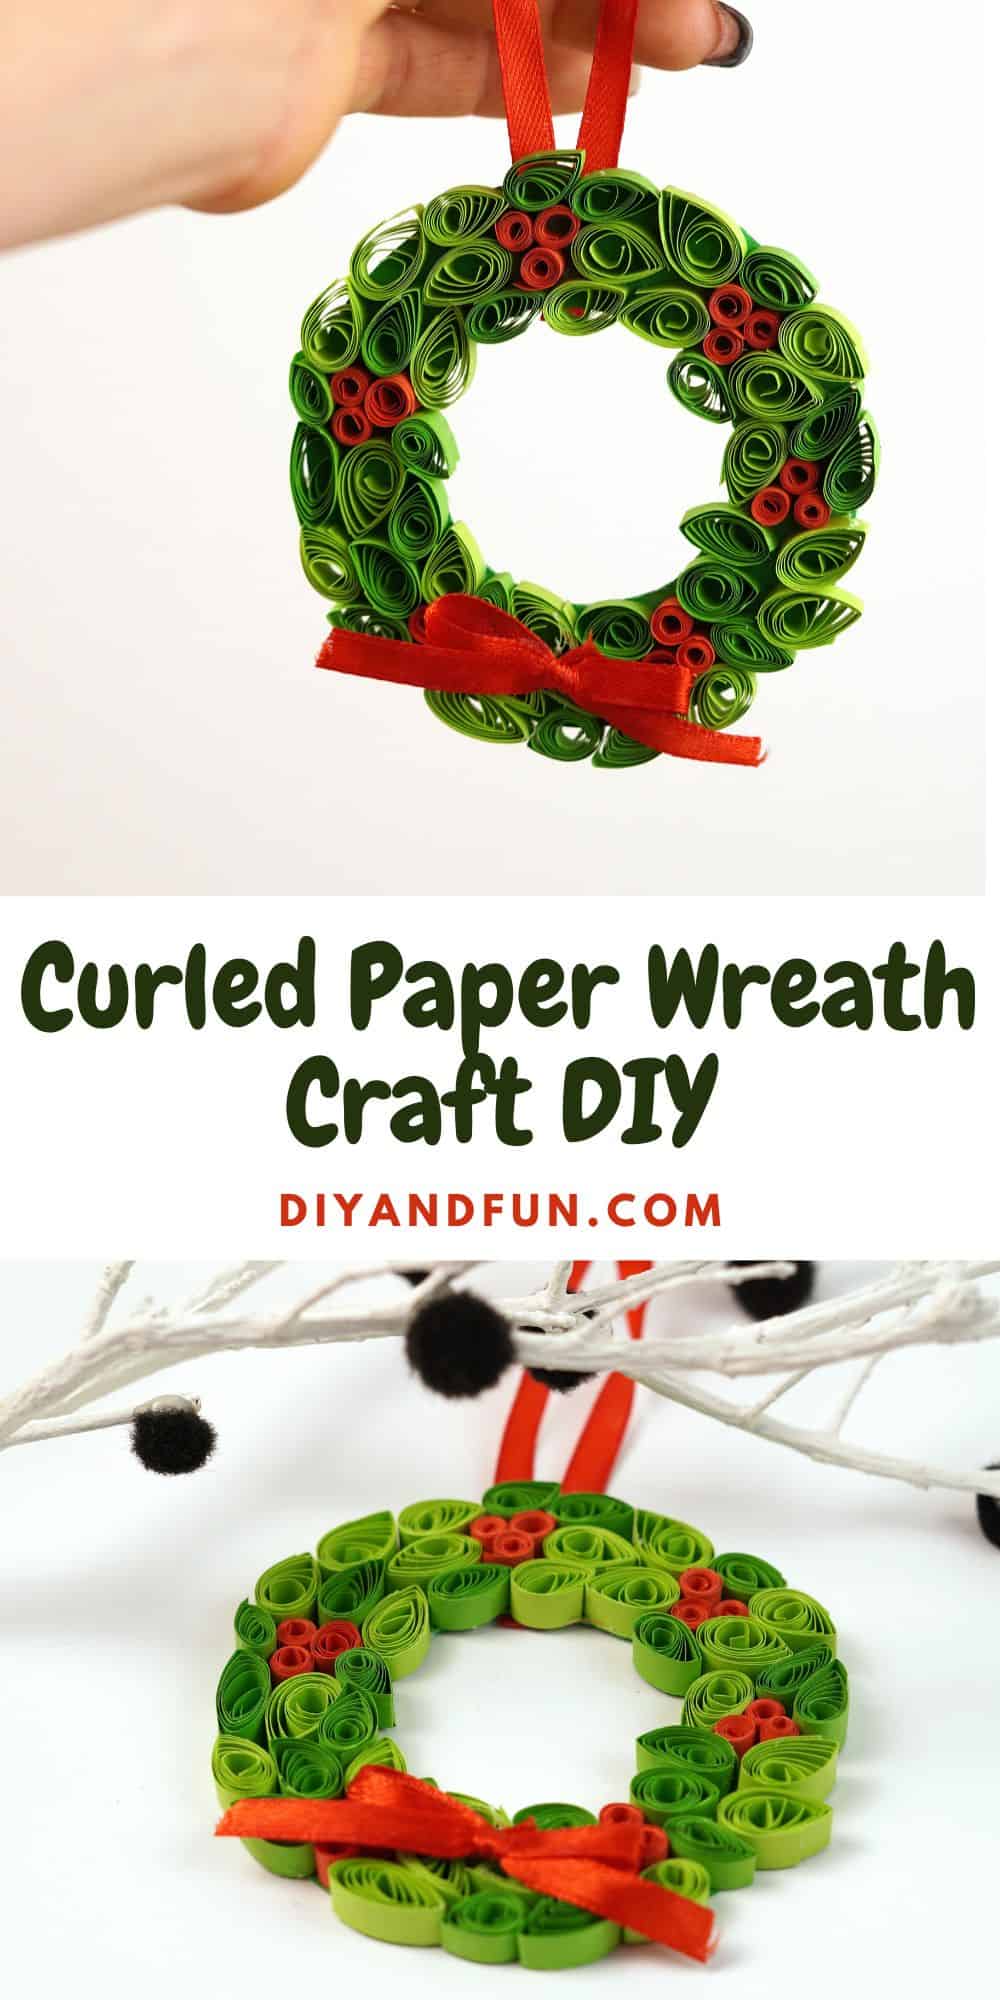 Curled Paper Wreath Craft DIY, a simple homemade holiday or Christmas wreath that can be used as an ornament. Most ages. Dollar Store.